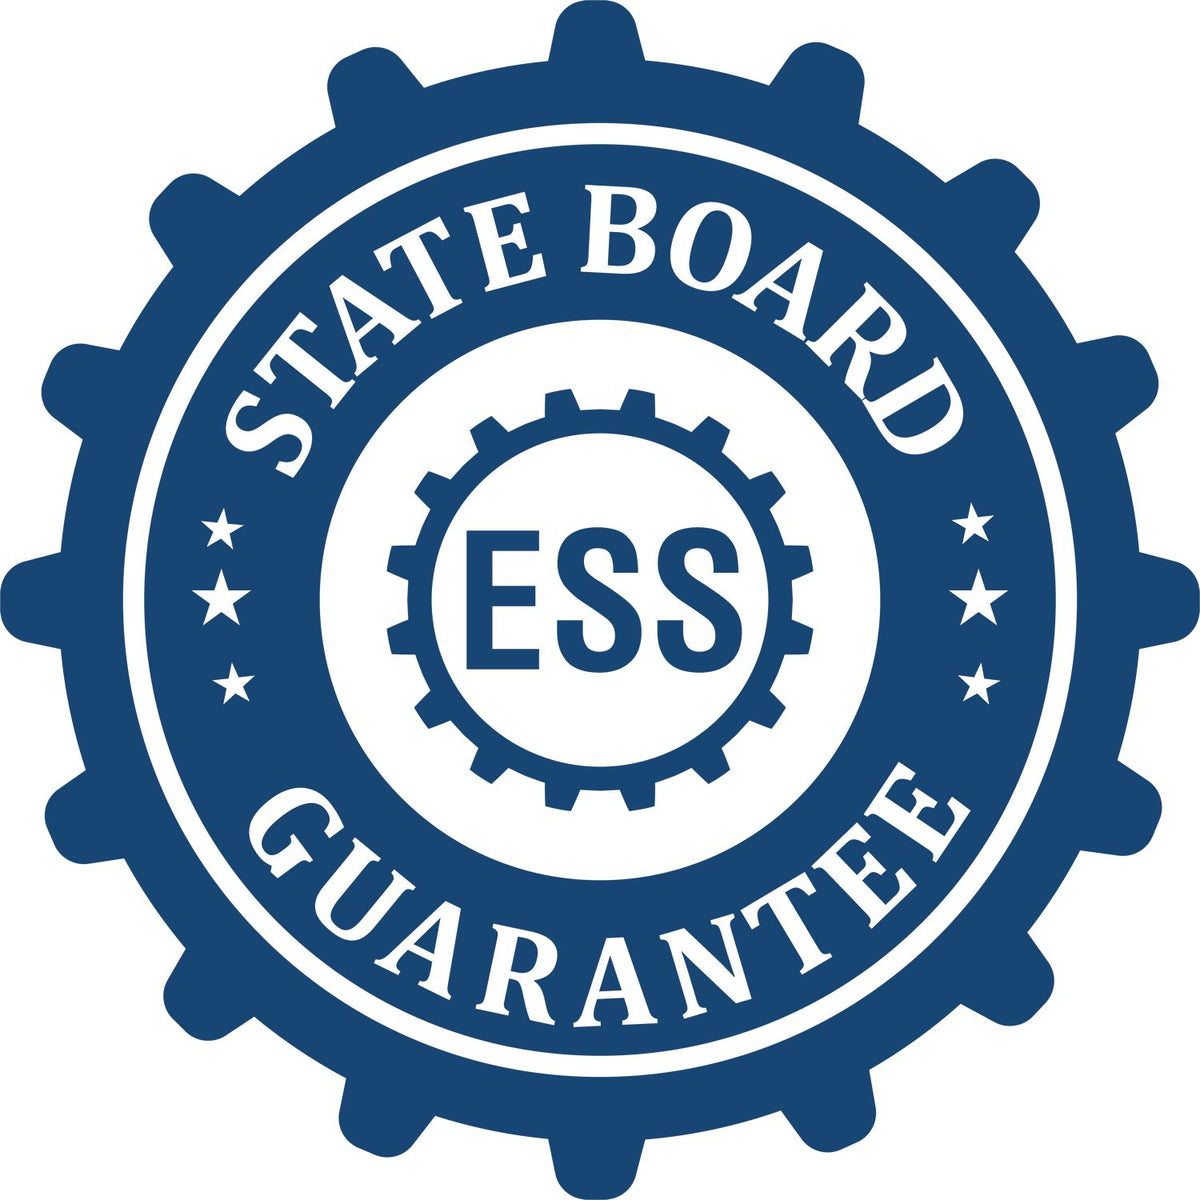 Professional eSeal Electronic Image Stamp of Seal 3008 State Board Guarantee